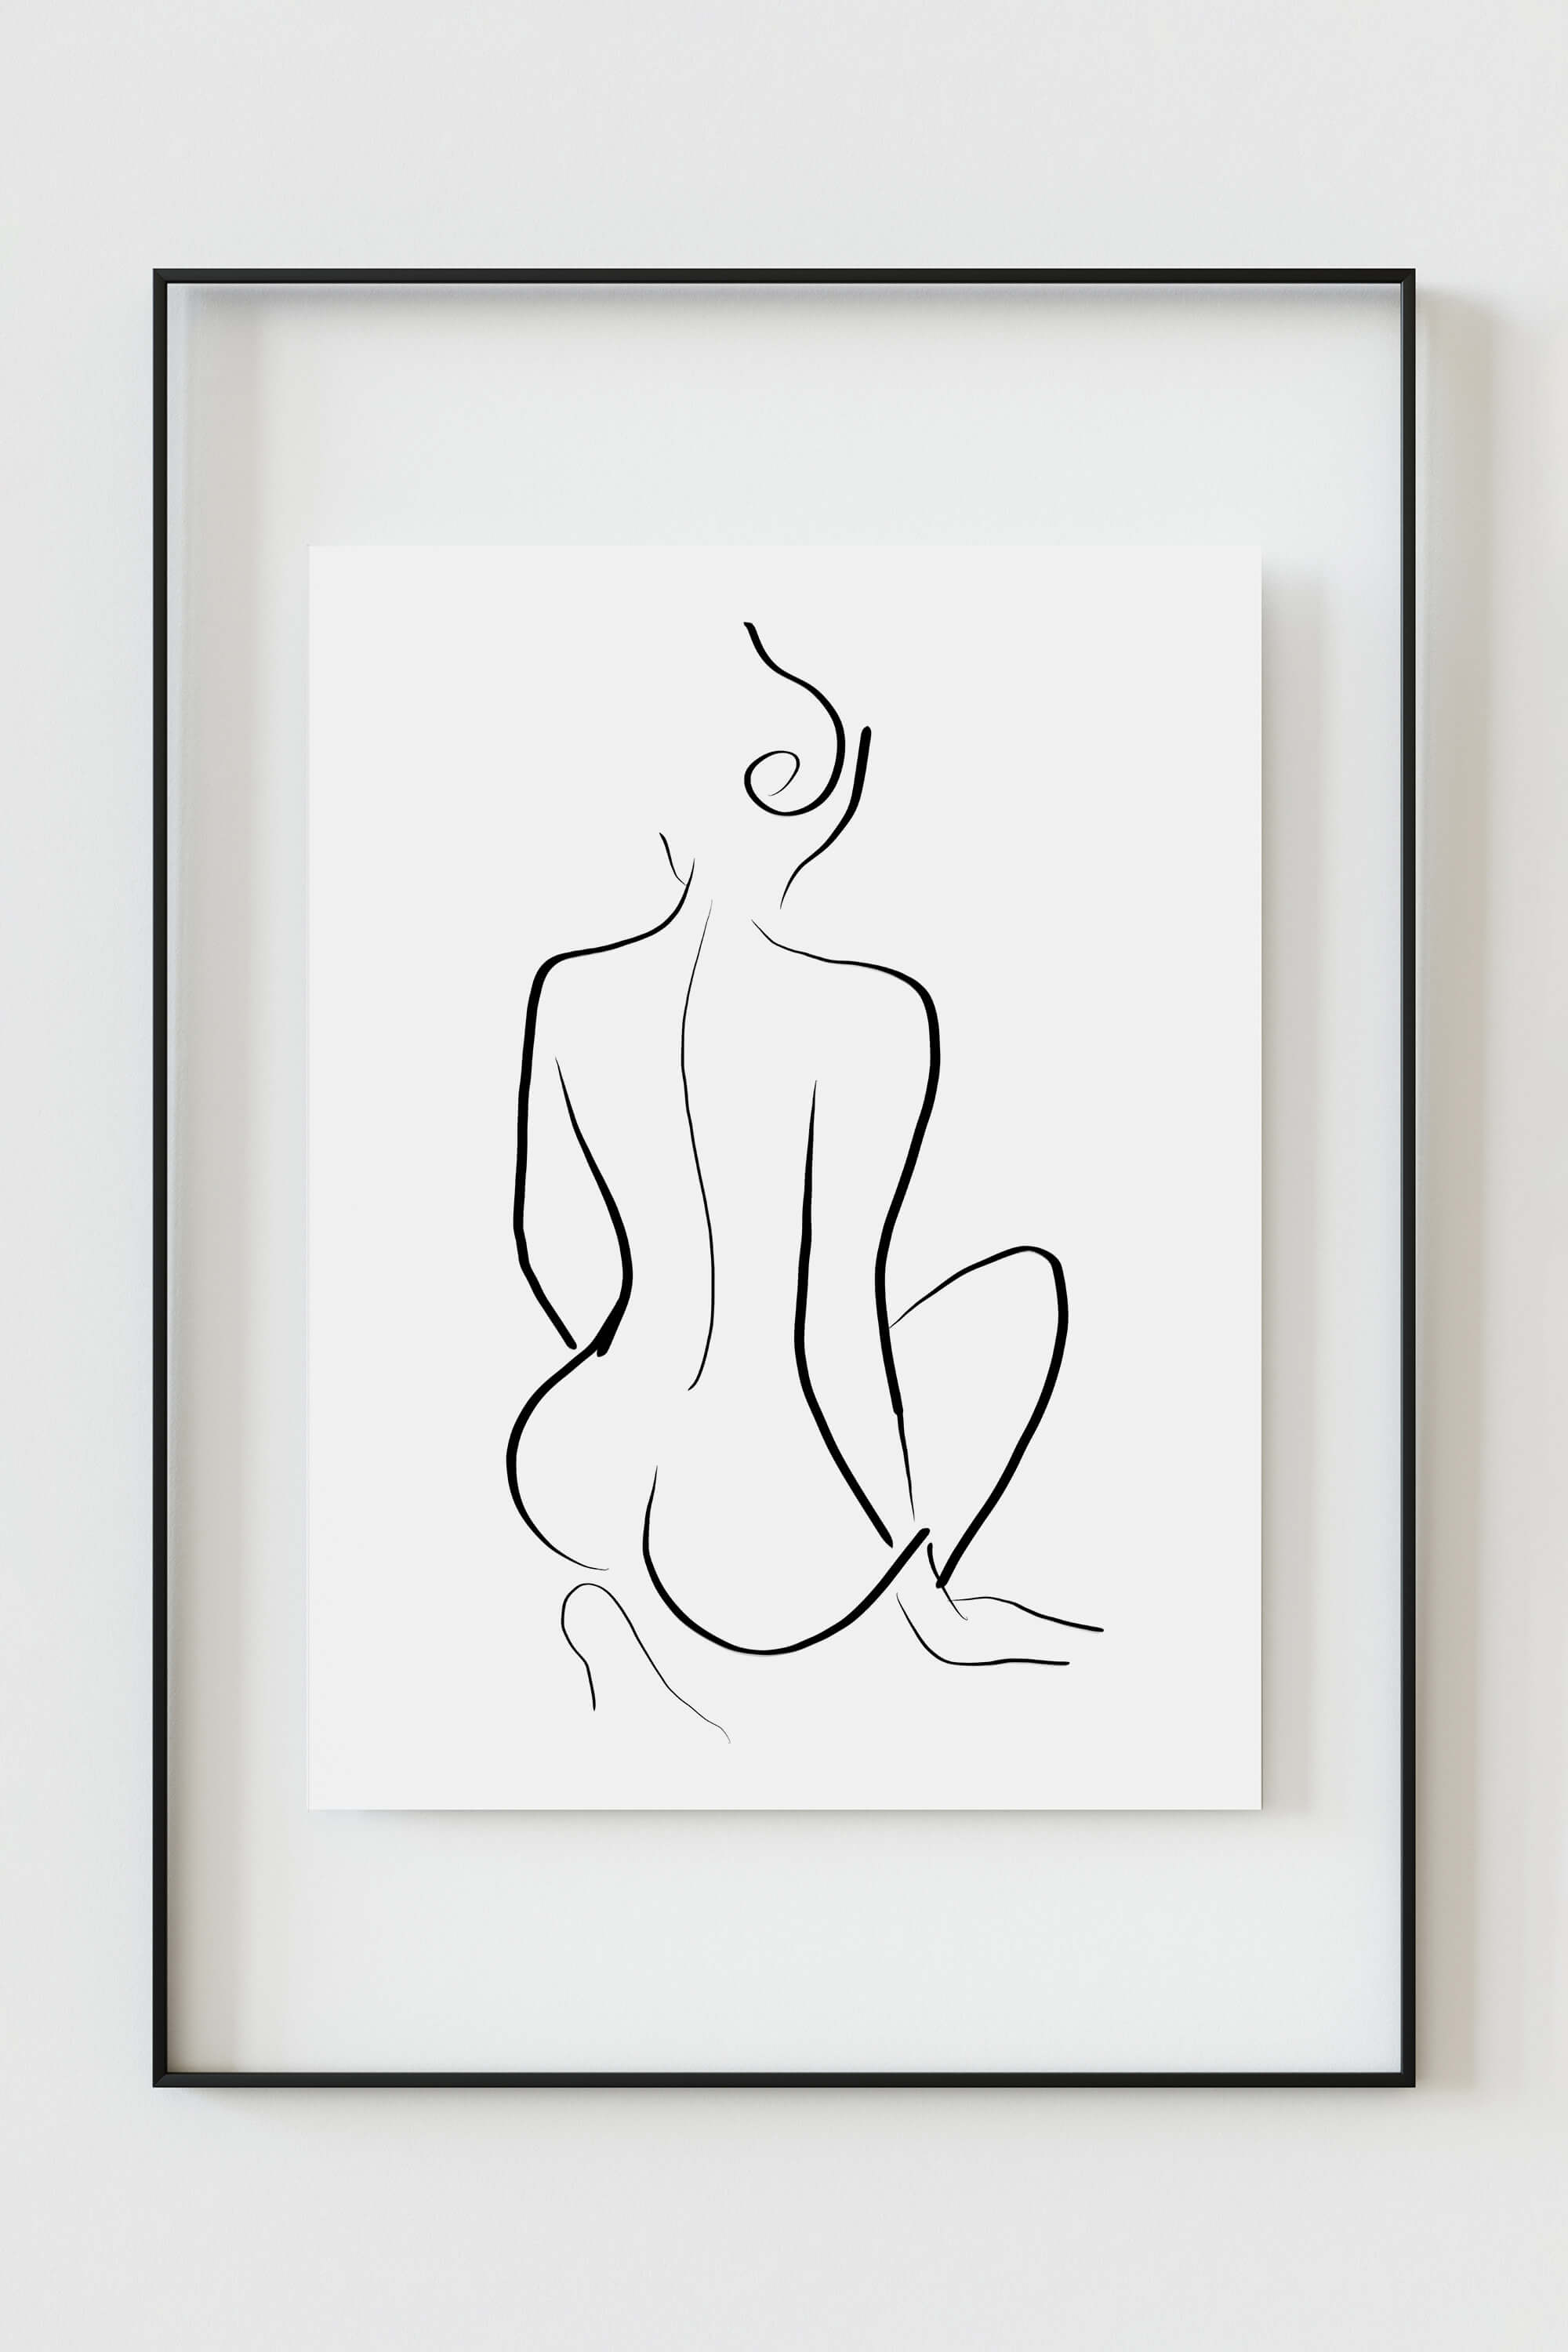 Captivating women's line art, perfect for creating desire in the bedroom. Each curve whispers secrets of femininity. Poster exudes sensuality, adding a touch of passion to your space.